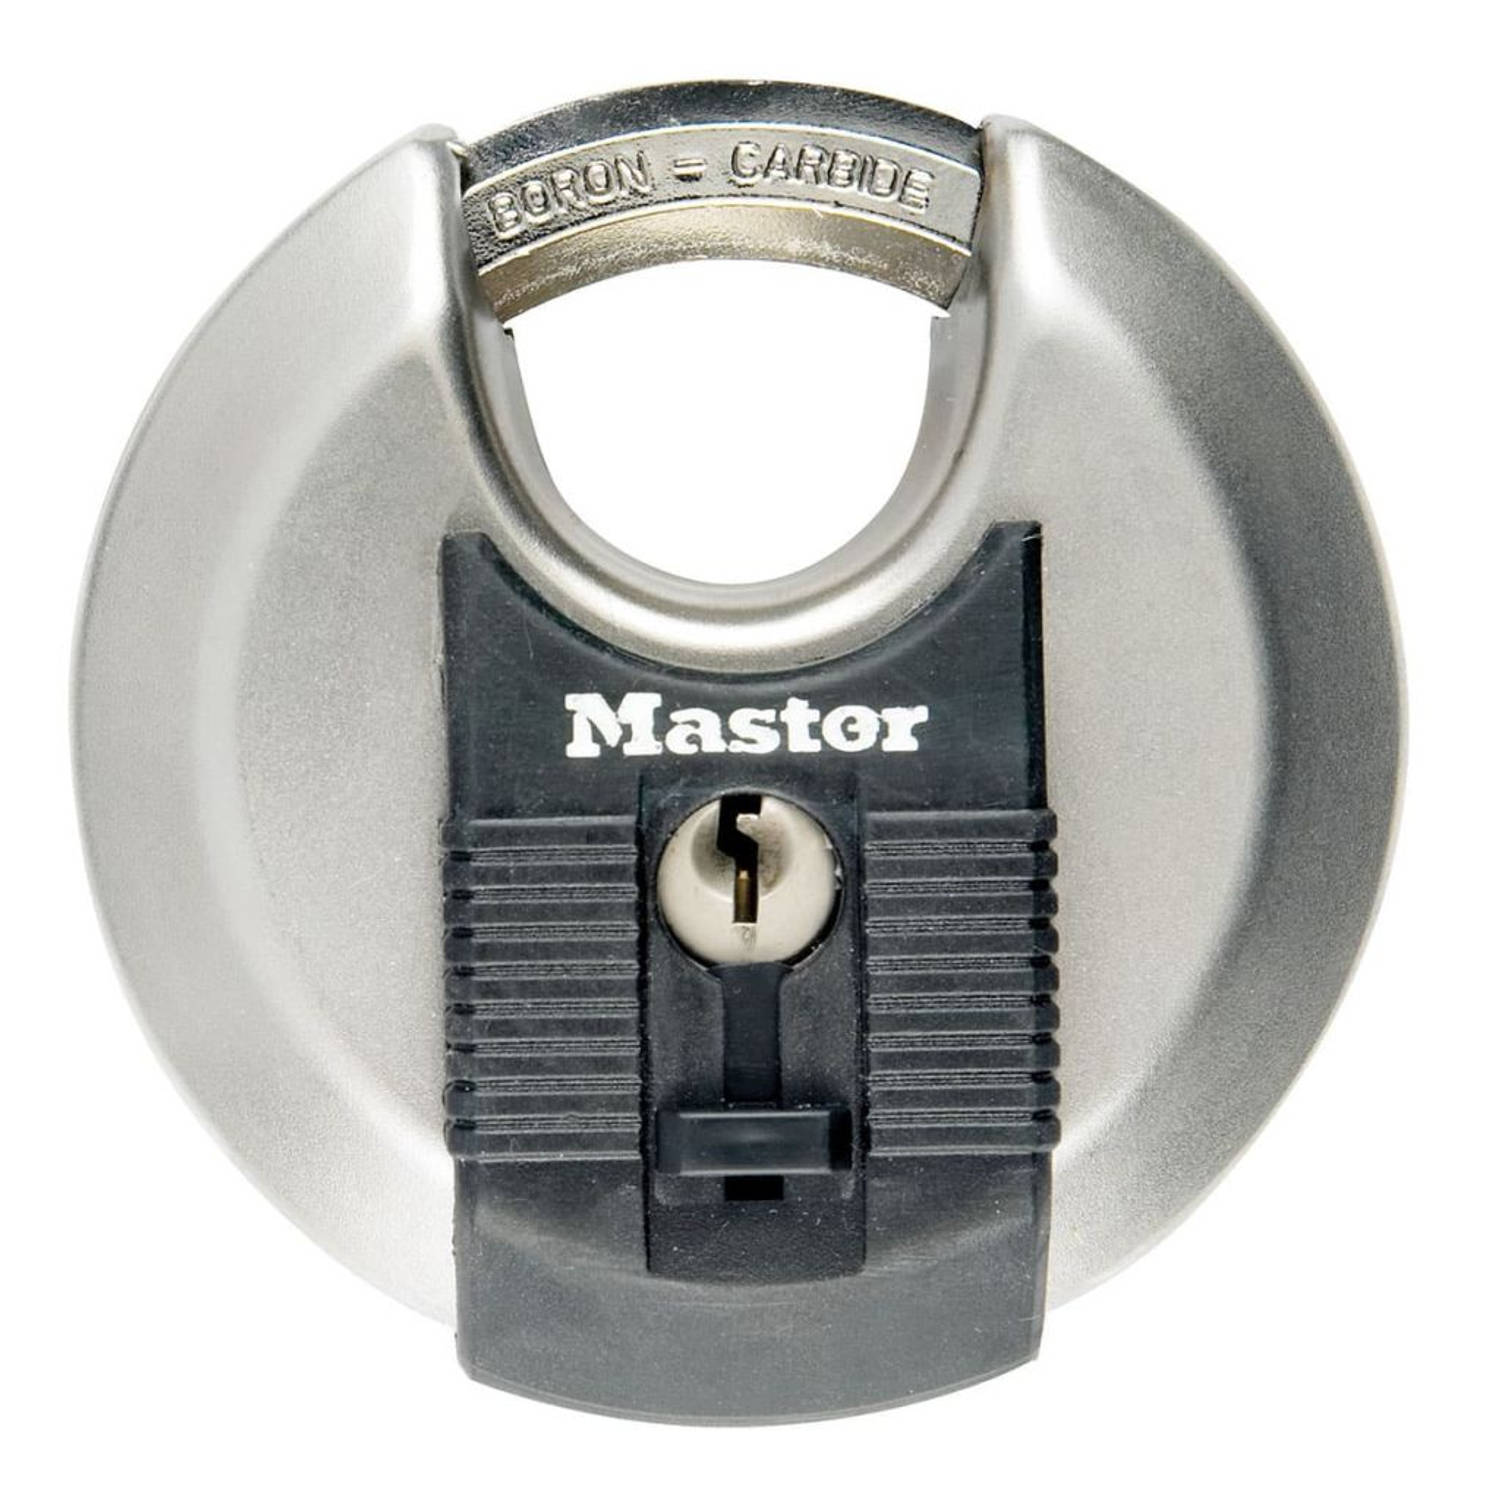 Masterlock Discus Hangslot Excell 80 Mm Roestvrij Staal M50eurd - Silver